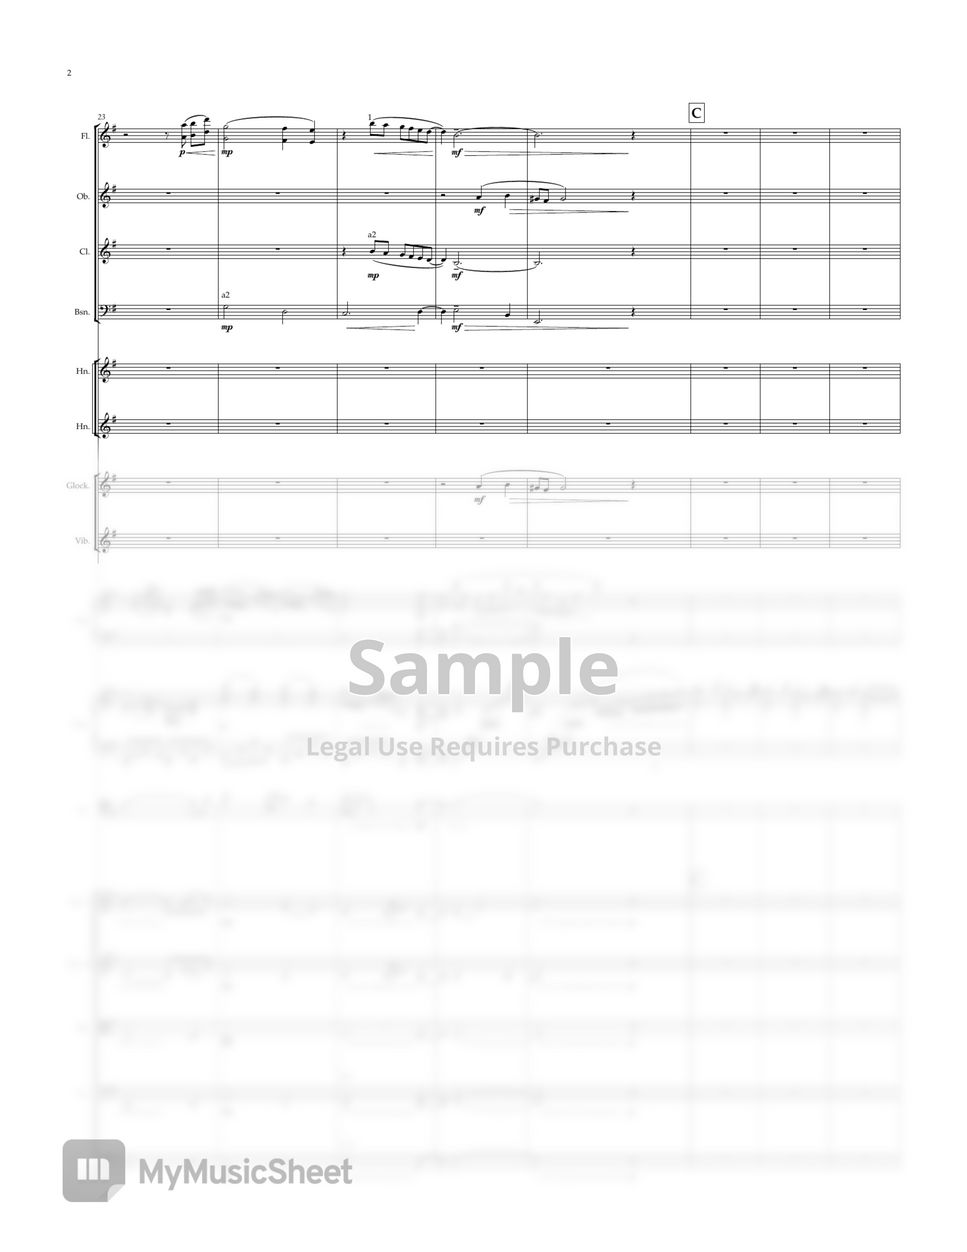 Joe Hisaishi - Departure - Melodyphony for Cello and Orchestra - Score and Part by Hai Mai